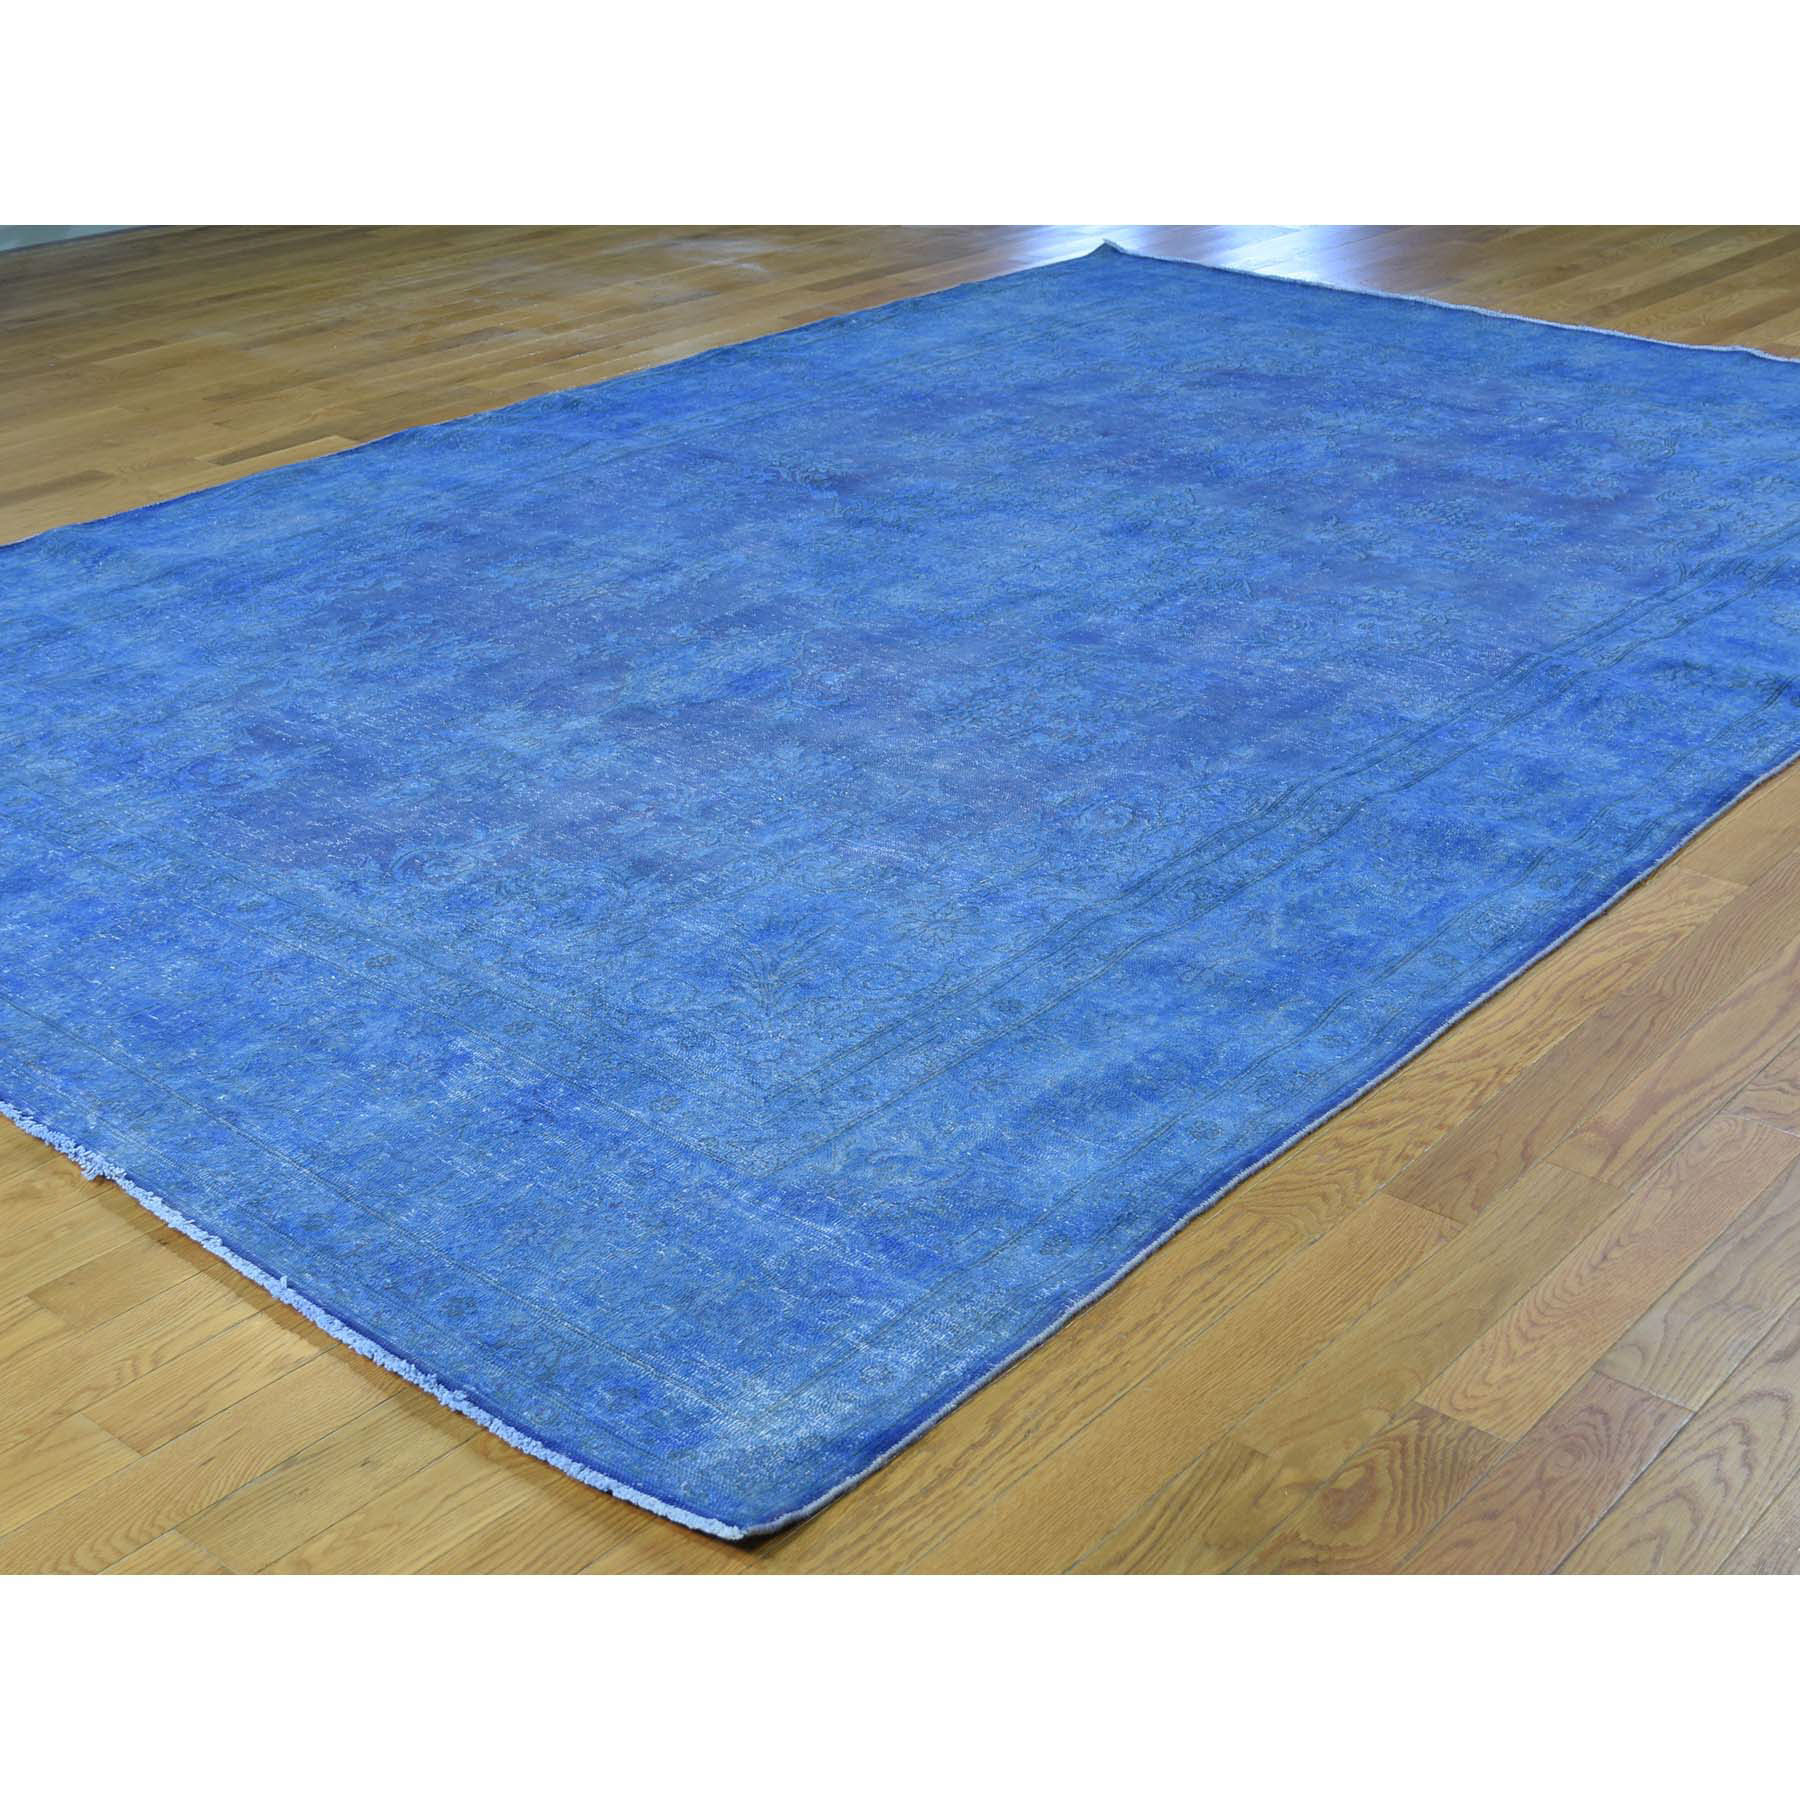 8-2 x12- Hand-Knotted Blue Overdyed Kerman 100 Percent Wool Oriental Rug 